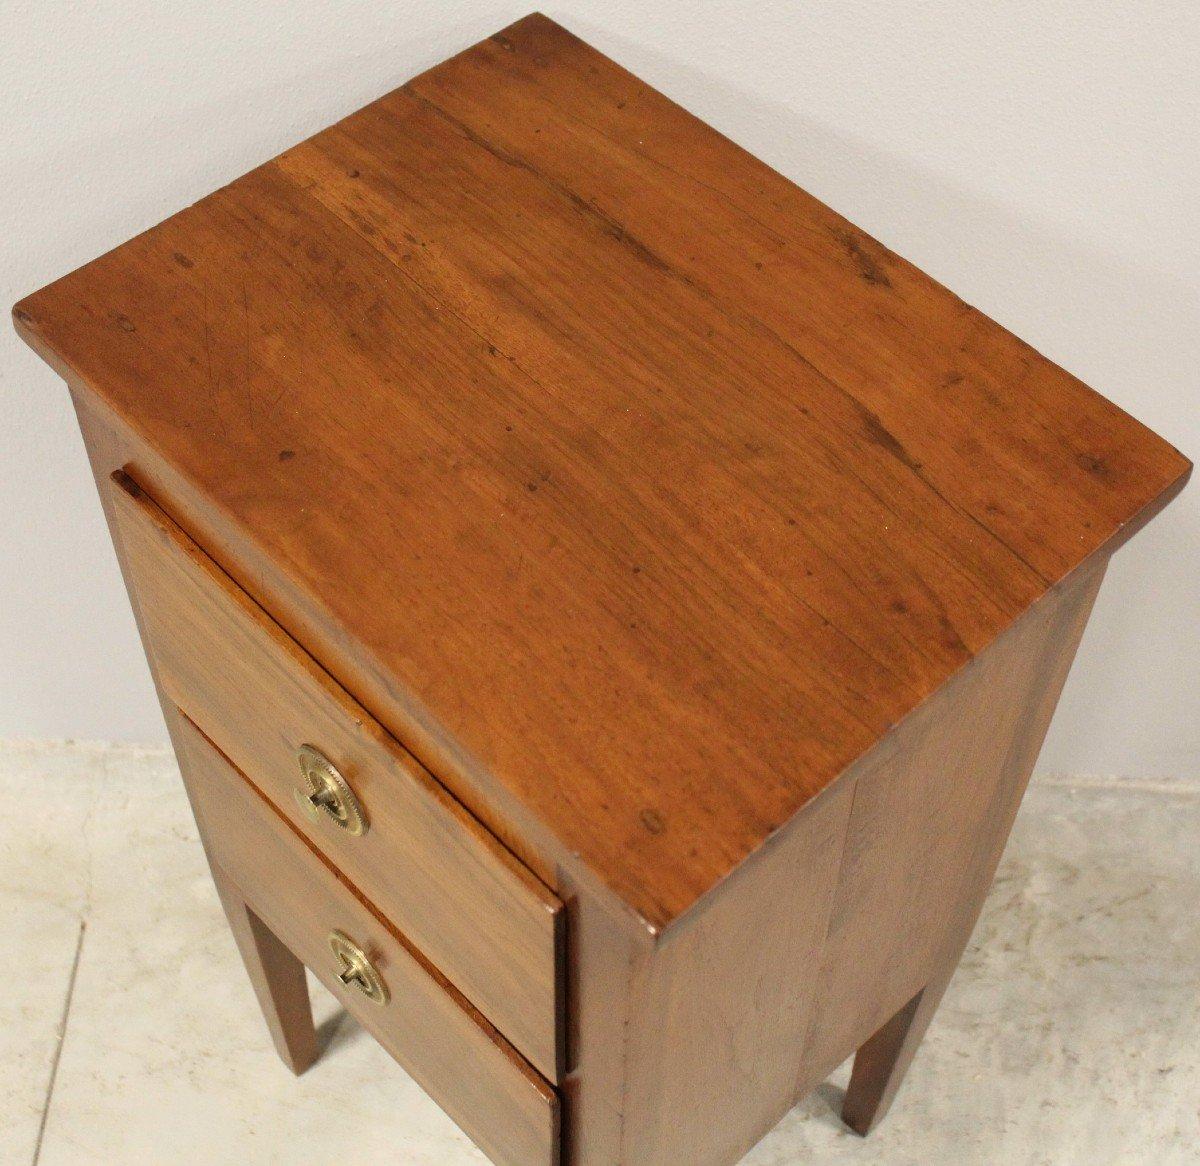 An Italian walnut bedside table from the 18th century with two drawers, tapered legs and brass hardware. Immerse yourself in the luxury of 18th-century Italian design with this walnut bedside table. Crafted from rich, warm walnut wood, this stunning